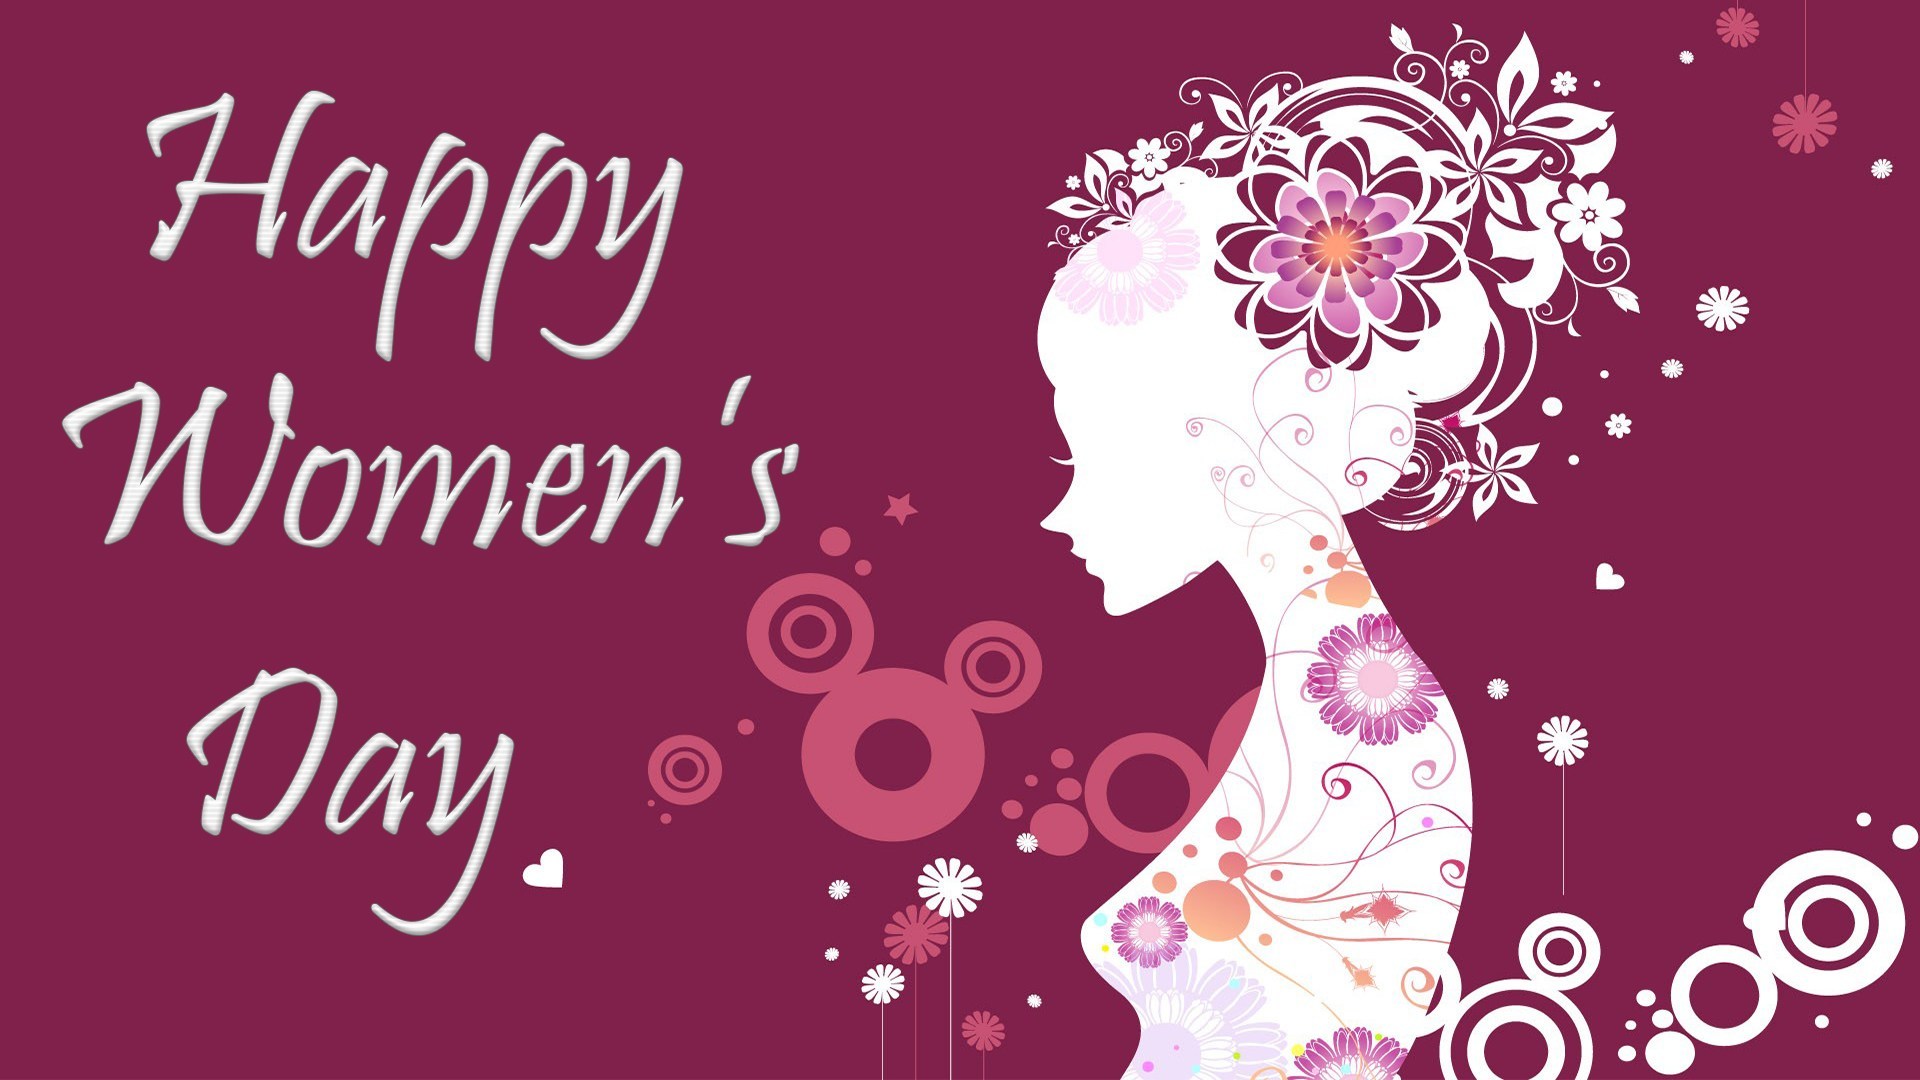 International Women’s Day 2019 Wishes, Quotes, Messages